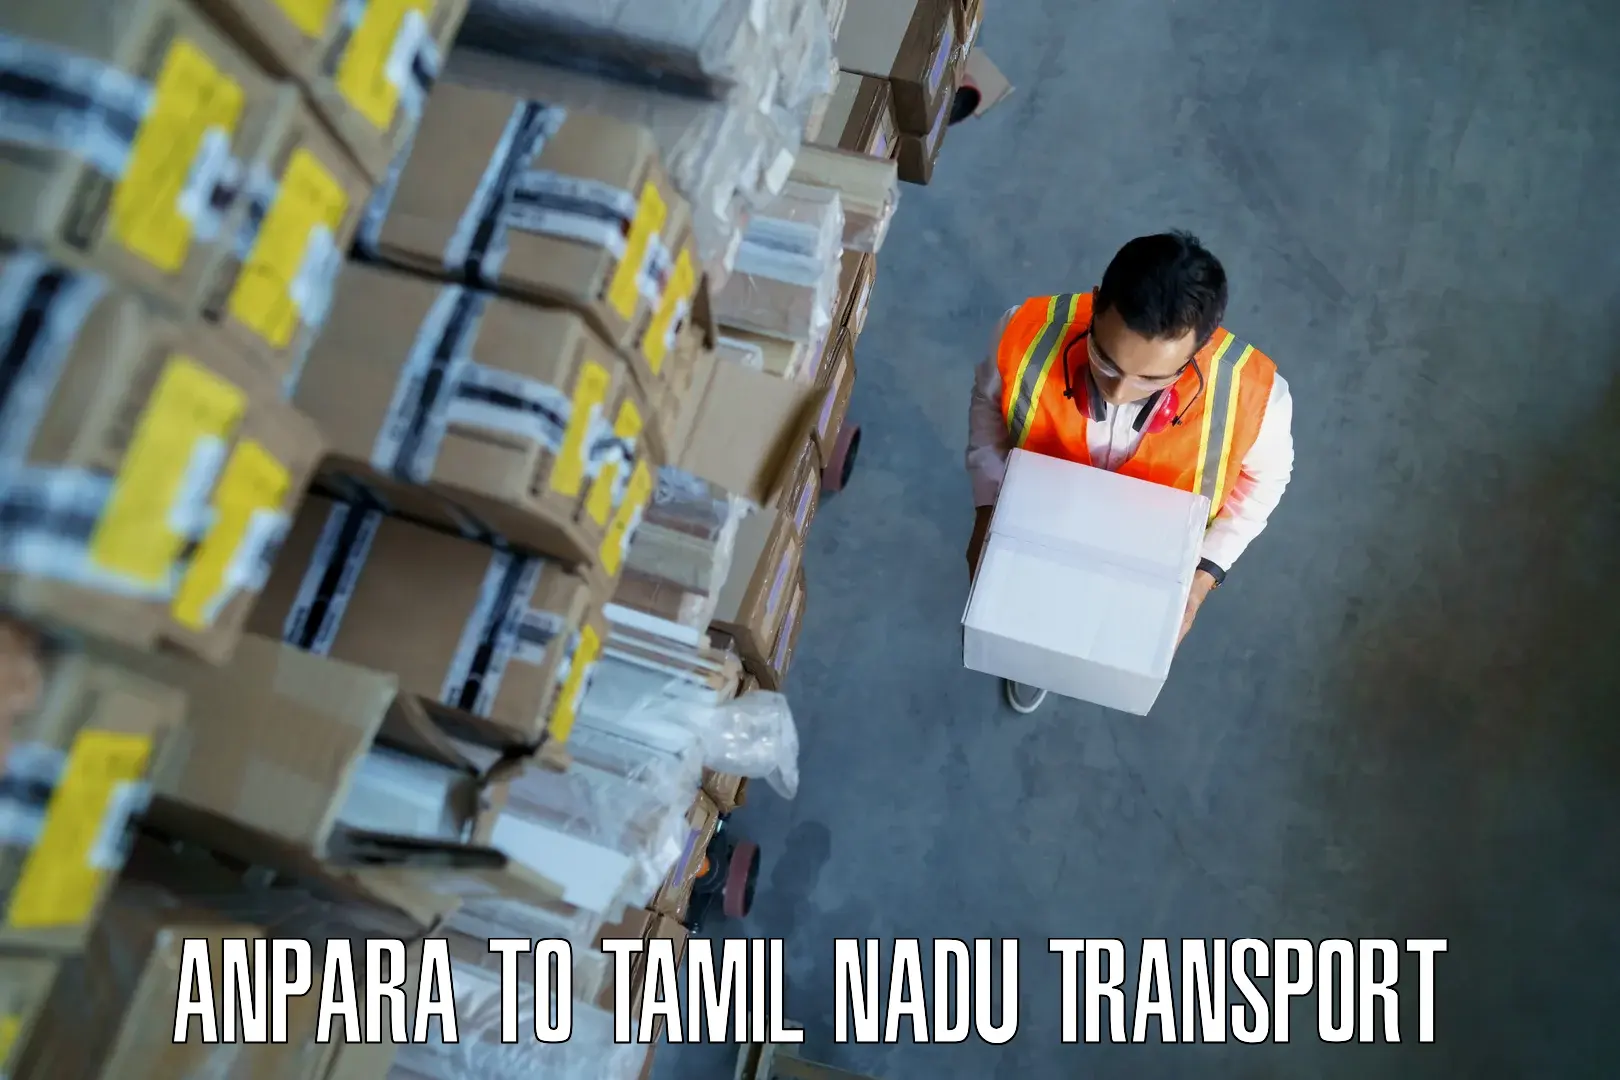 Road transport services Anpara to Chetpet